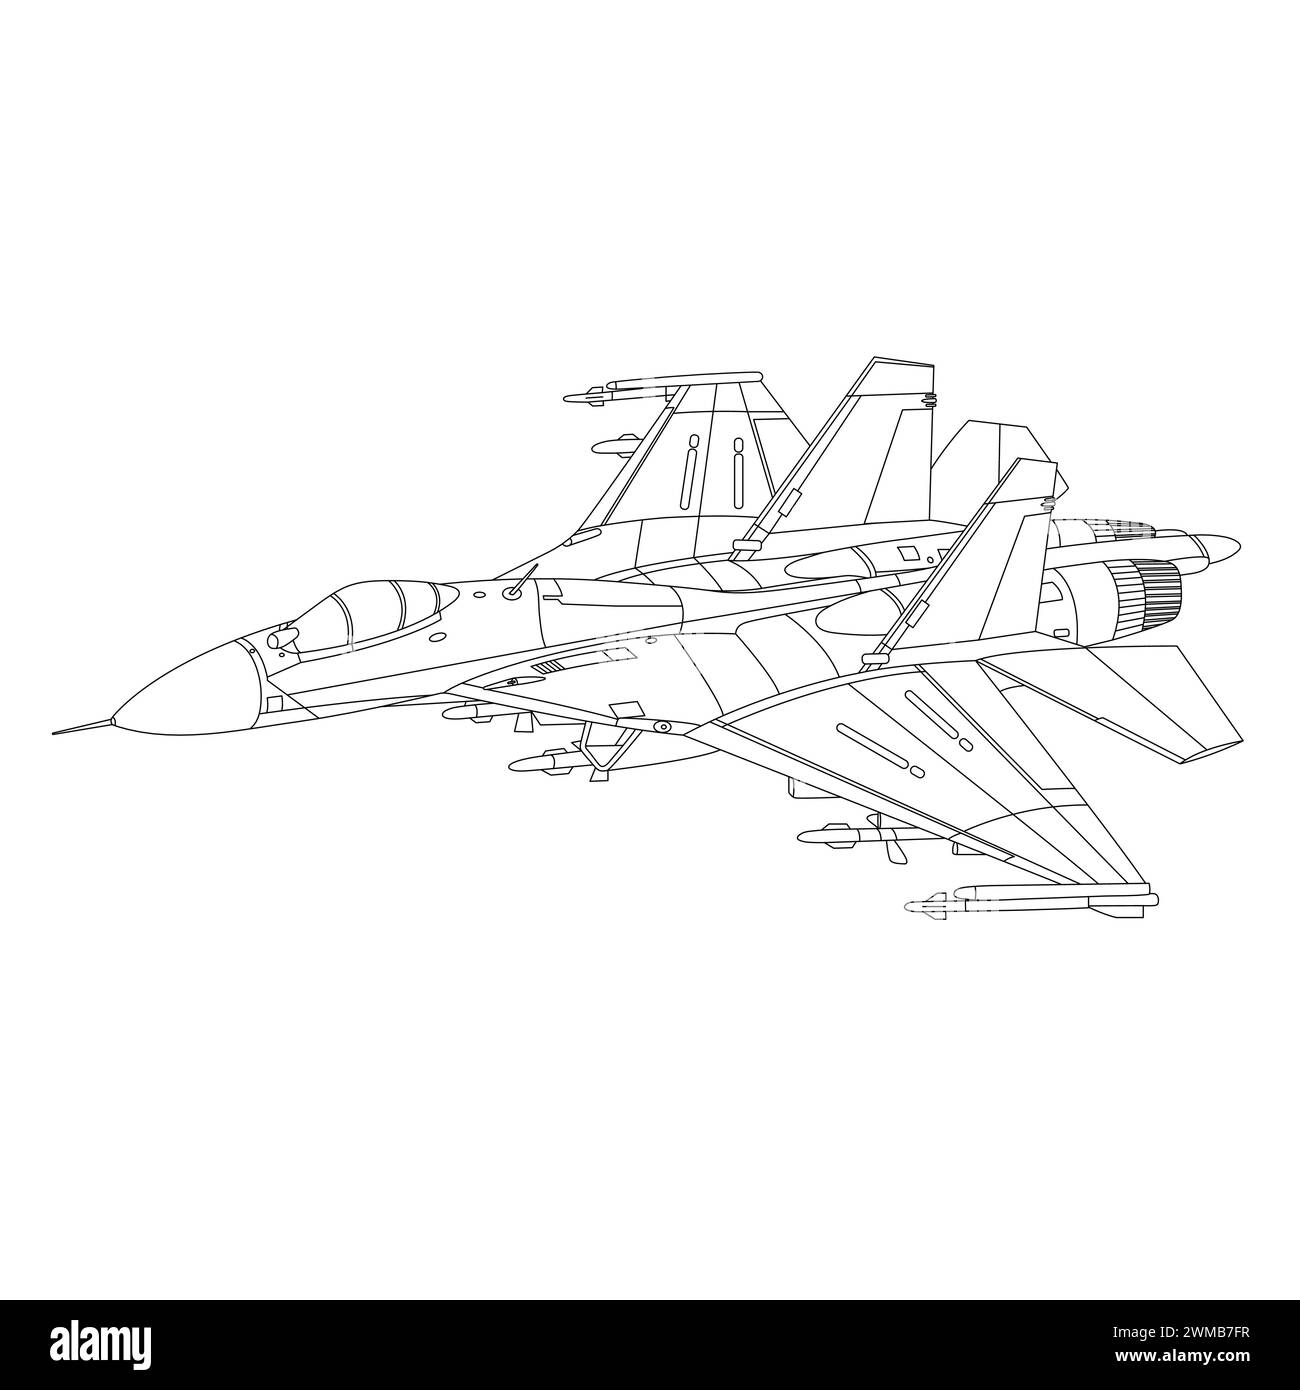 Sukhoi Su-27 Aircraft Outline Illustration. Fighter Jet Su27 Flanker Coloring Book For Children And Adults. Military Airplane Isolated on White Backgr Stock Vector